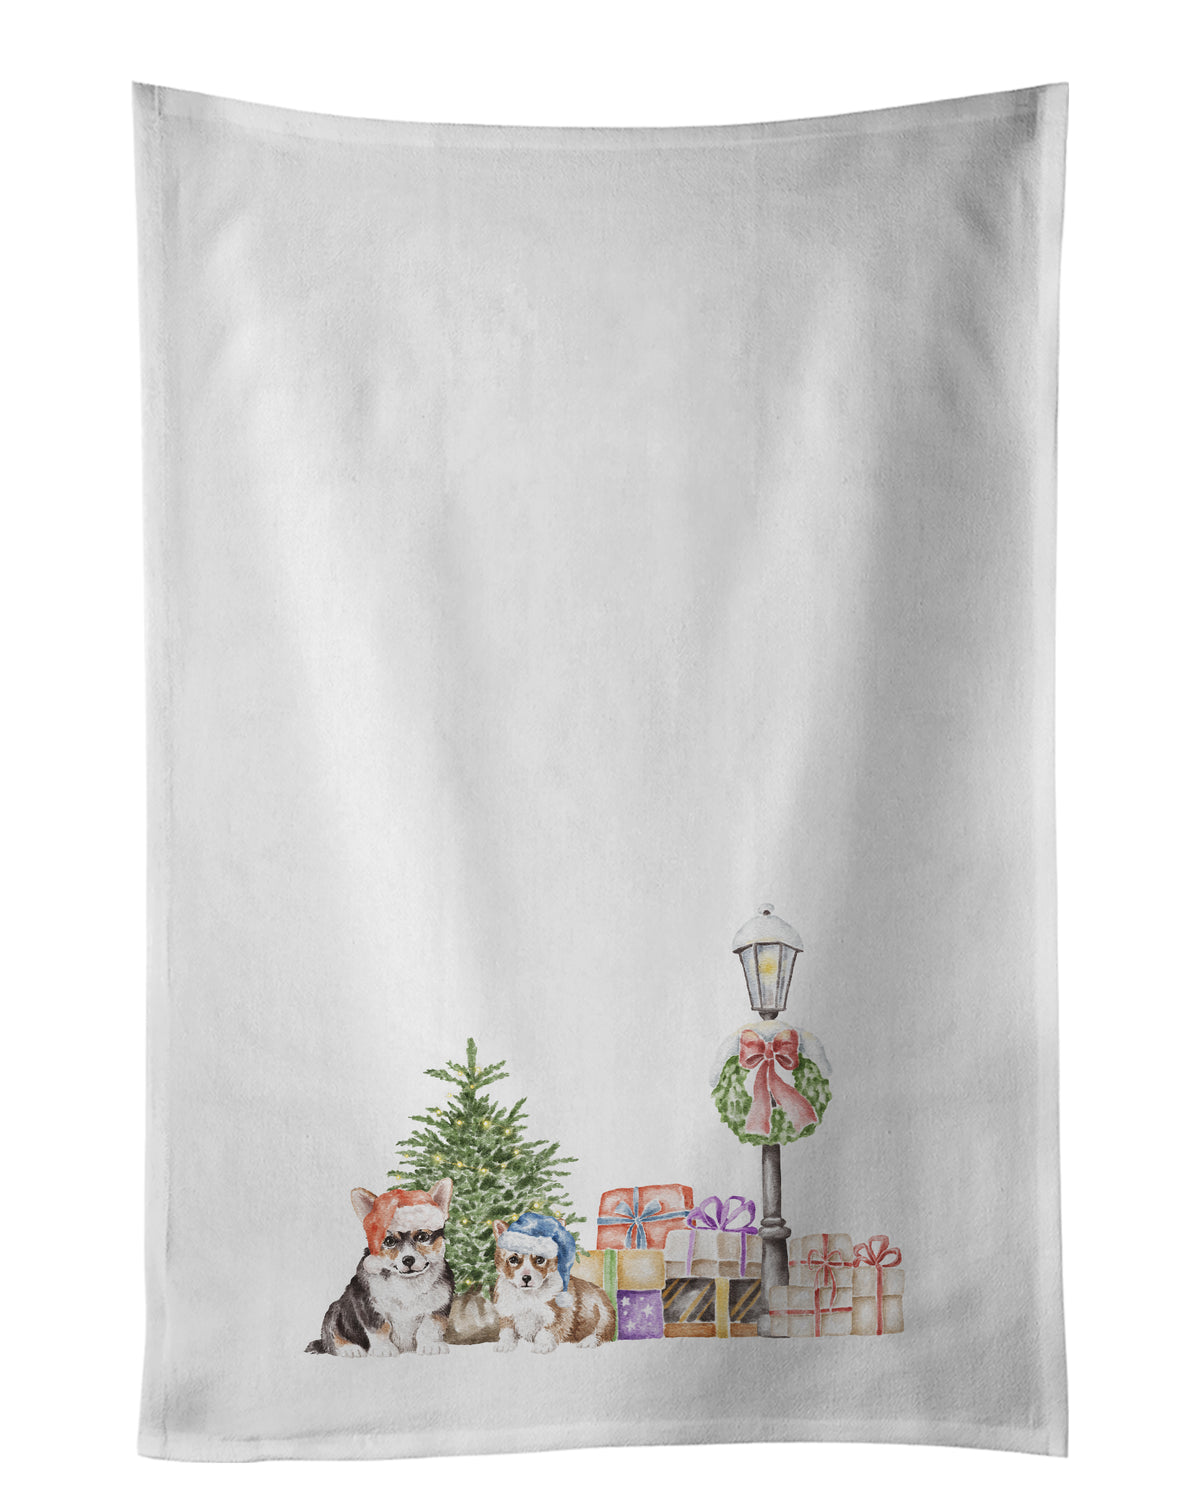 Buy this Corgi Tricolor and Puppy with Christmas Wonderland White Kitchen Towel Set of 2